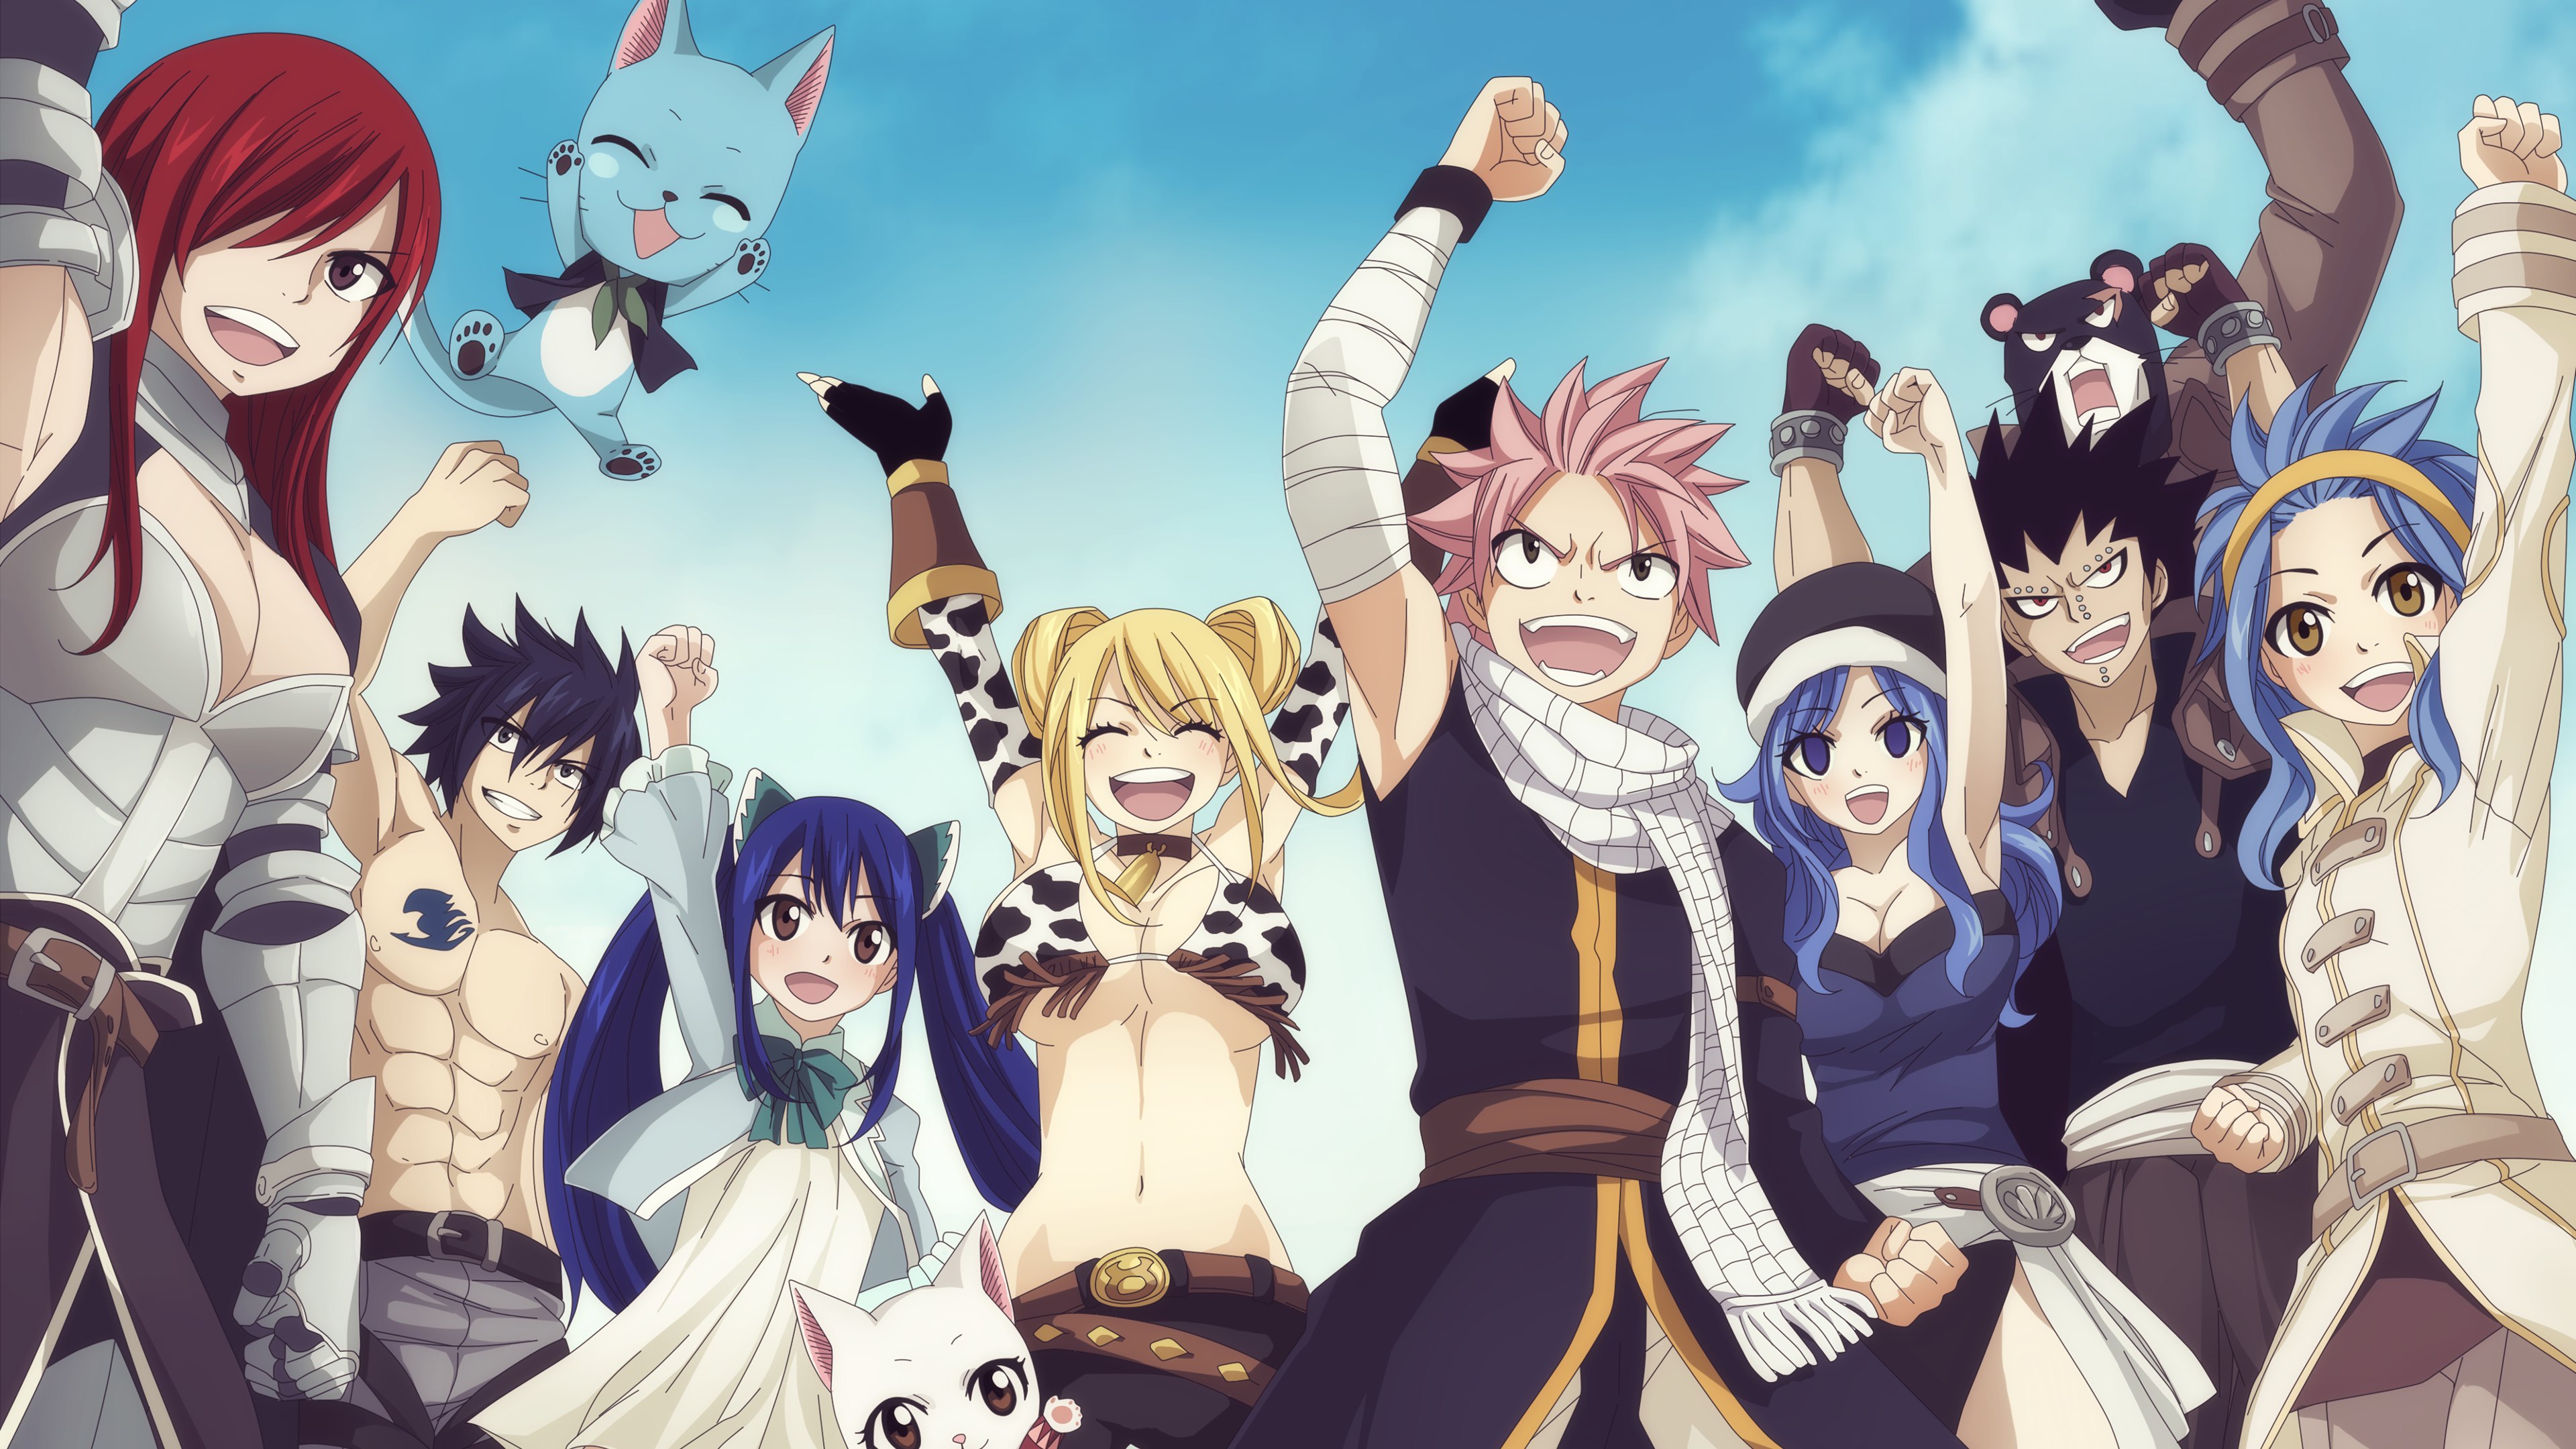 Fairy Tail 36 4K 5K HD Anime Wallpapers, HD Wallpapers